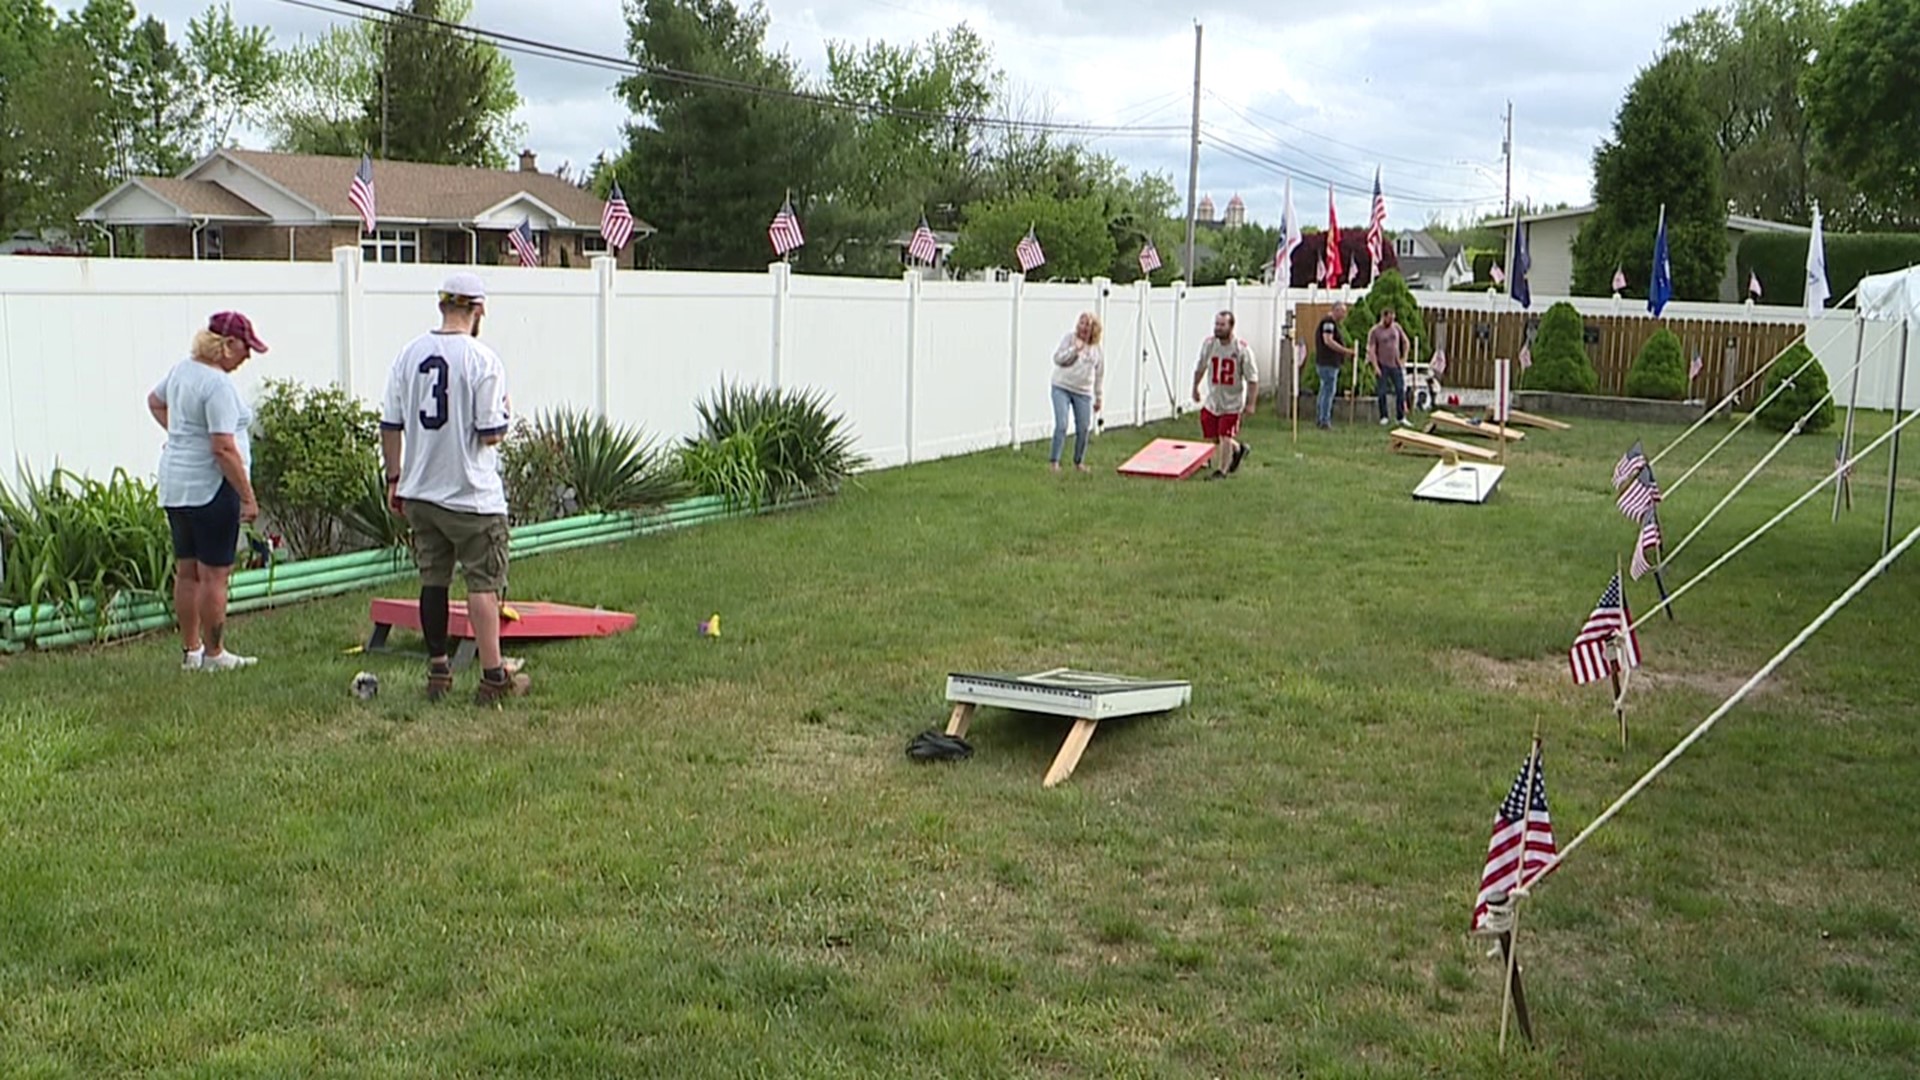 Members of the Scranton Fire Department gathered at VFW Post 25 Saturday for a cornhole tournament benefitting Coats for Kids.